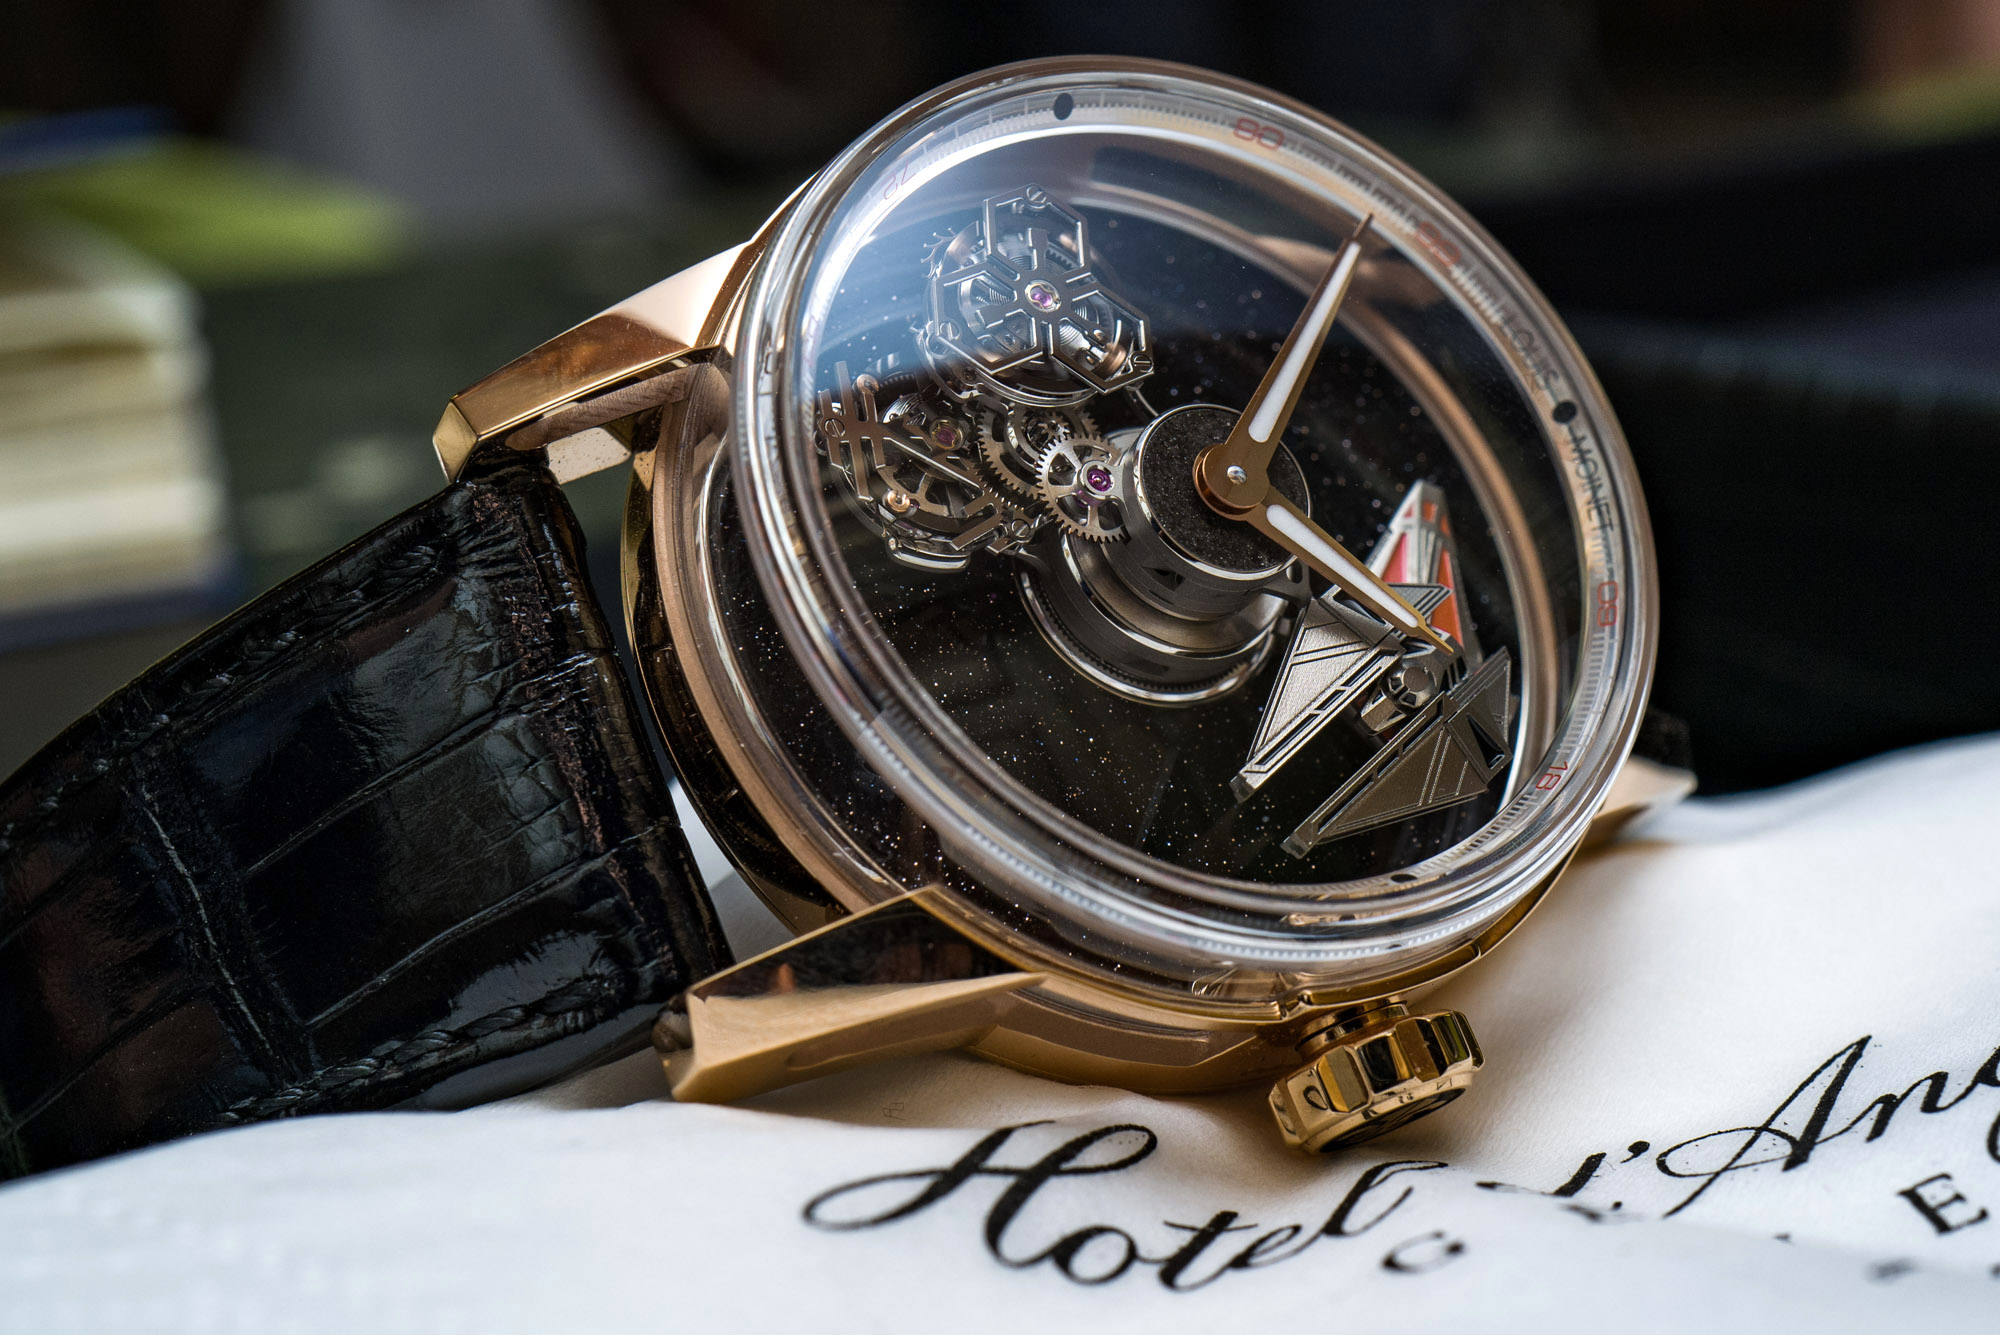 Introducing The Louis Moinet $380,000 Space Revolution Watch